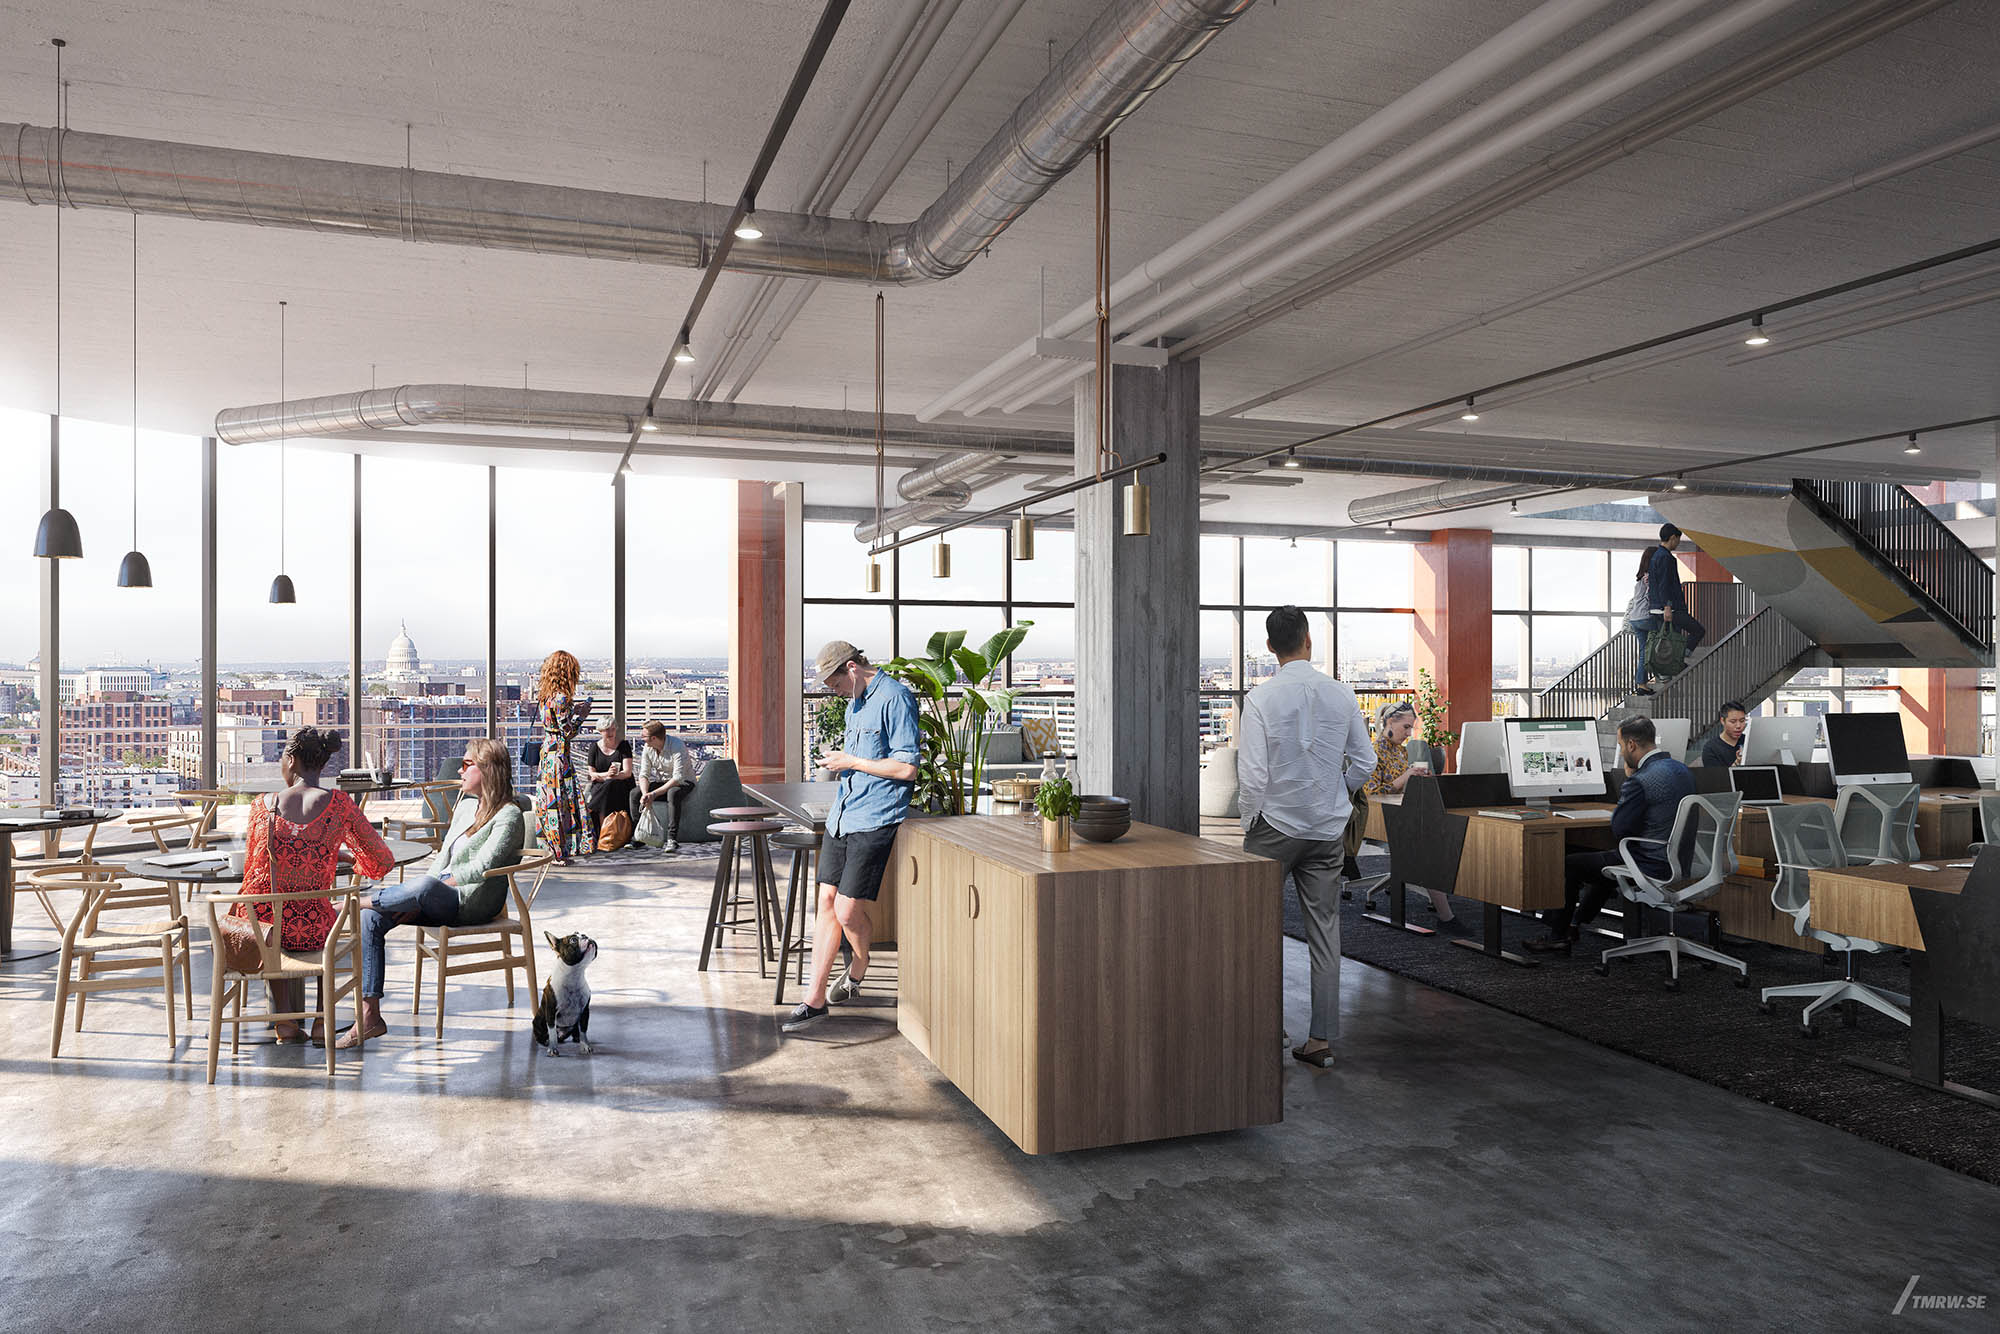 Architectural visualization of Signal House for Gensler, a office area with people hanging out in day light from an interior view.